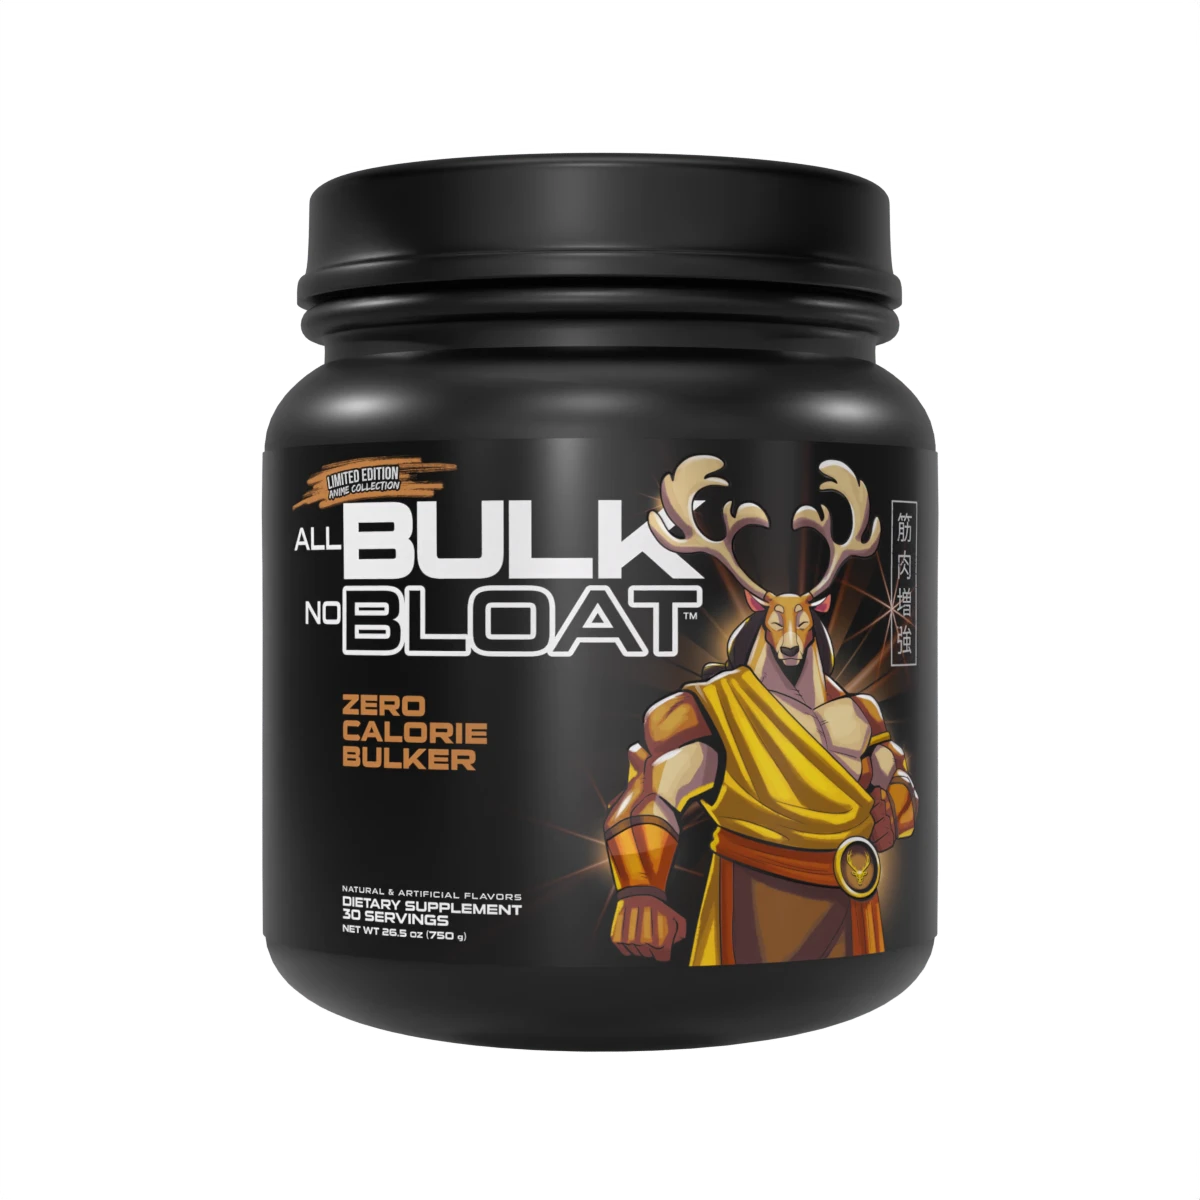 All Bulk No Bloat by Bucked Up